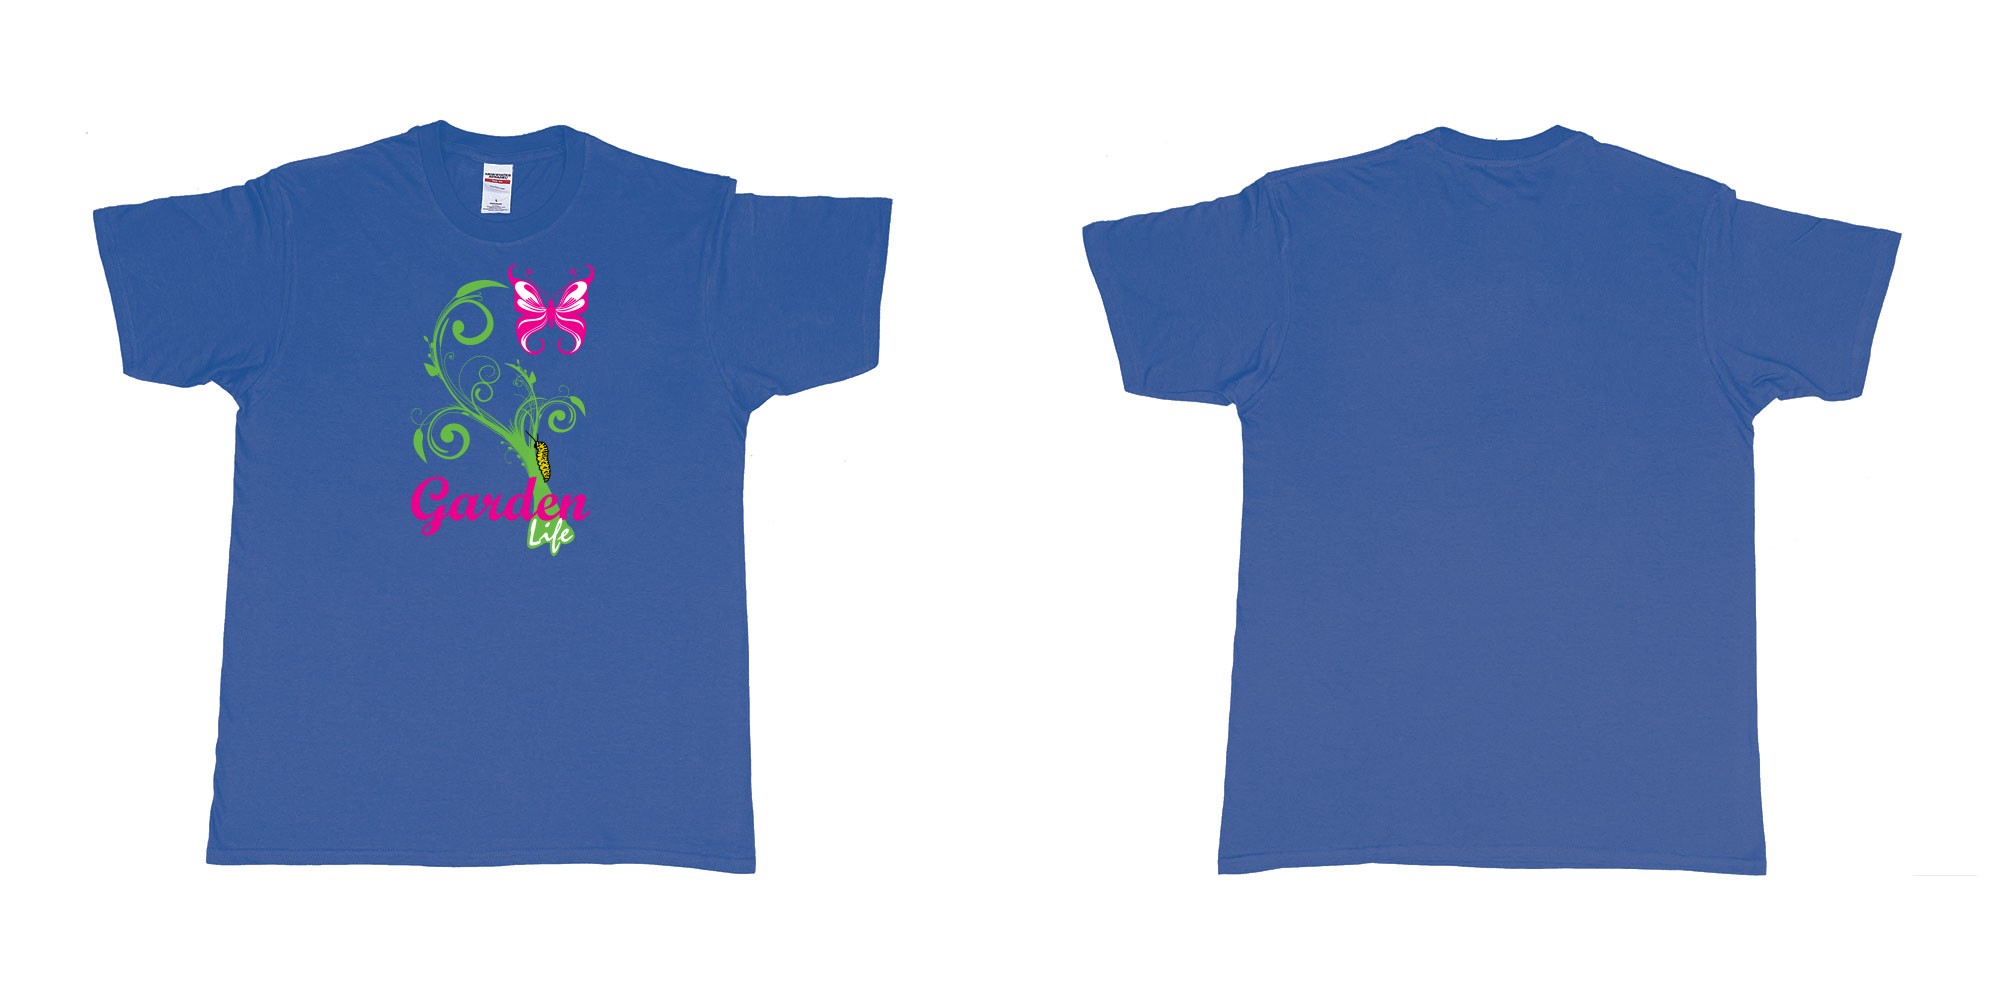 Custom tshirt design garden life transformation from a caterpillar and a butterfly in fabric color royal-blue choice your own text made in Bali by The Pirate Way